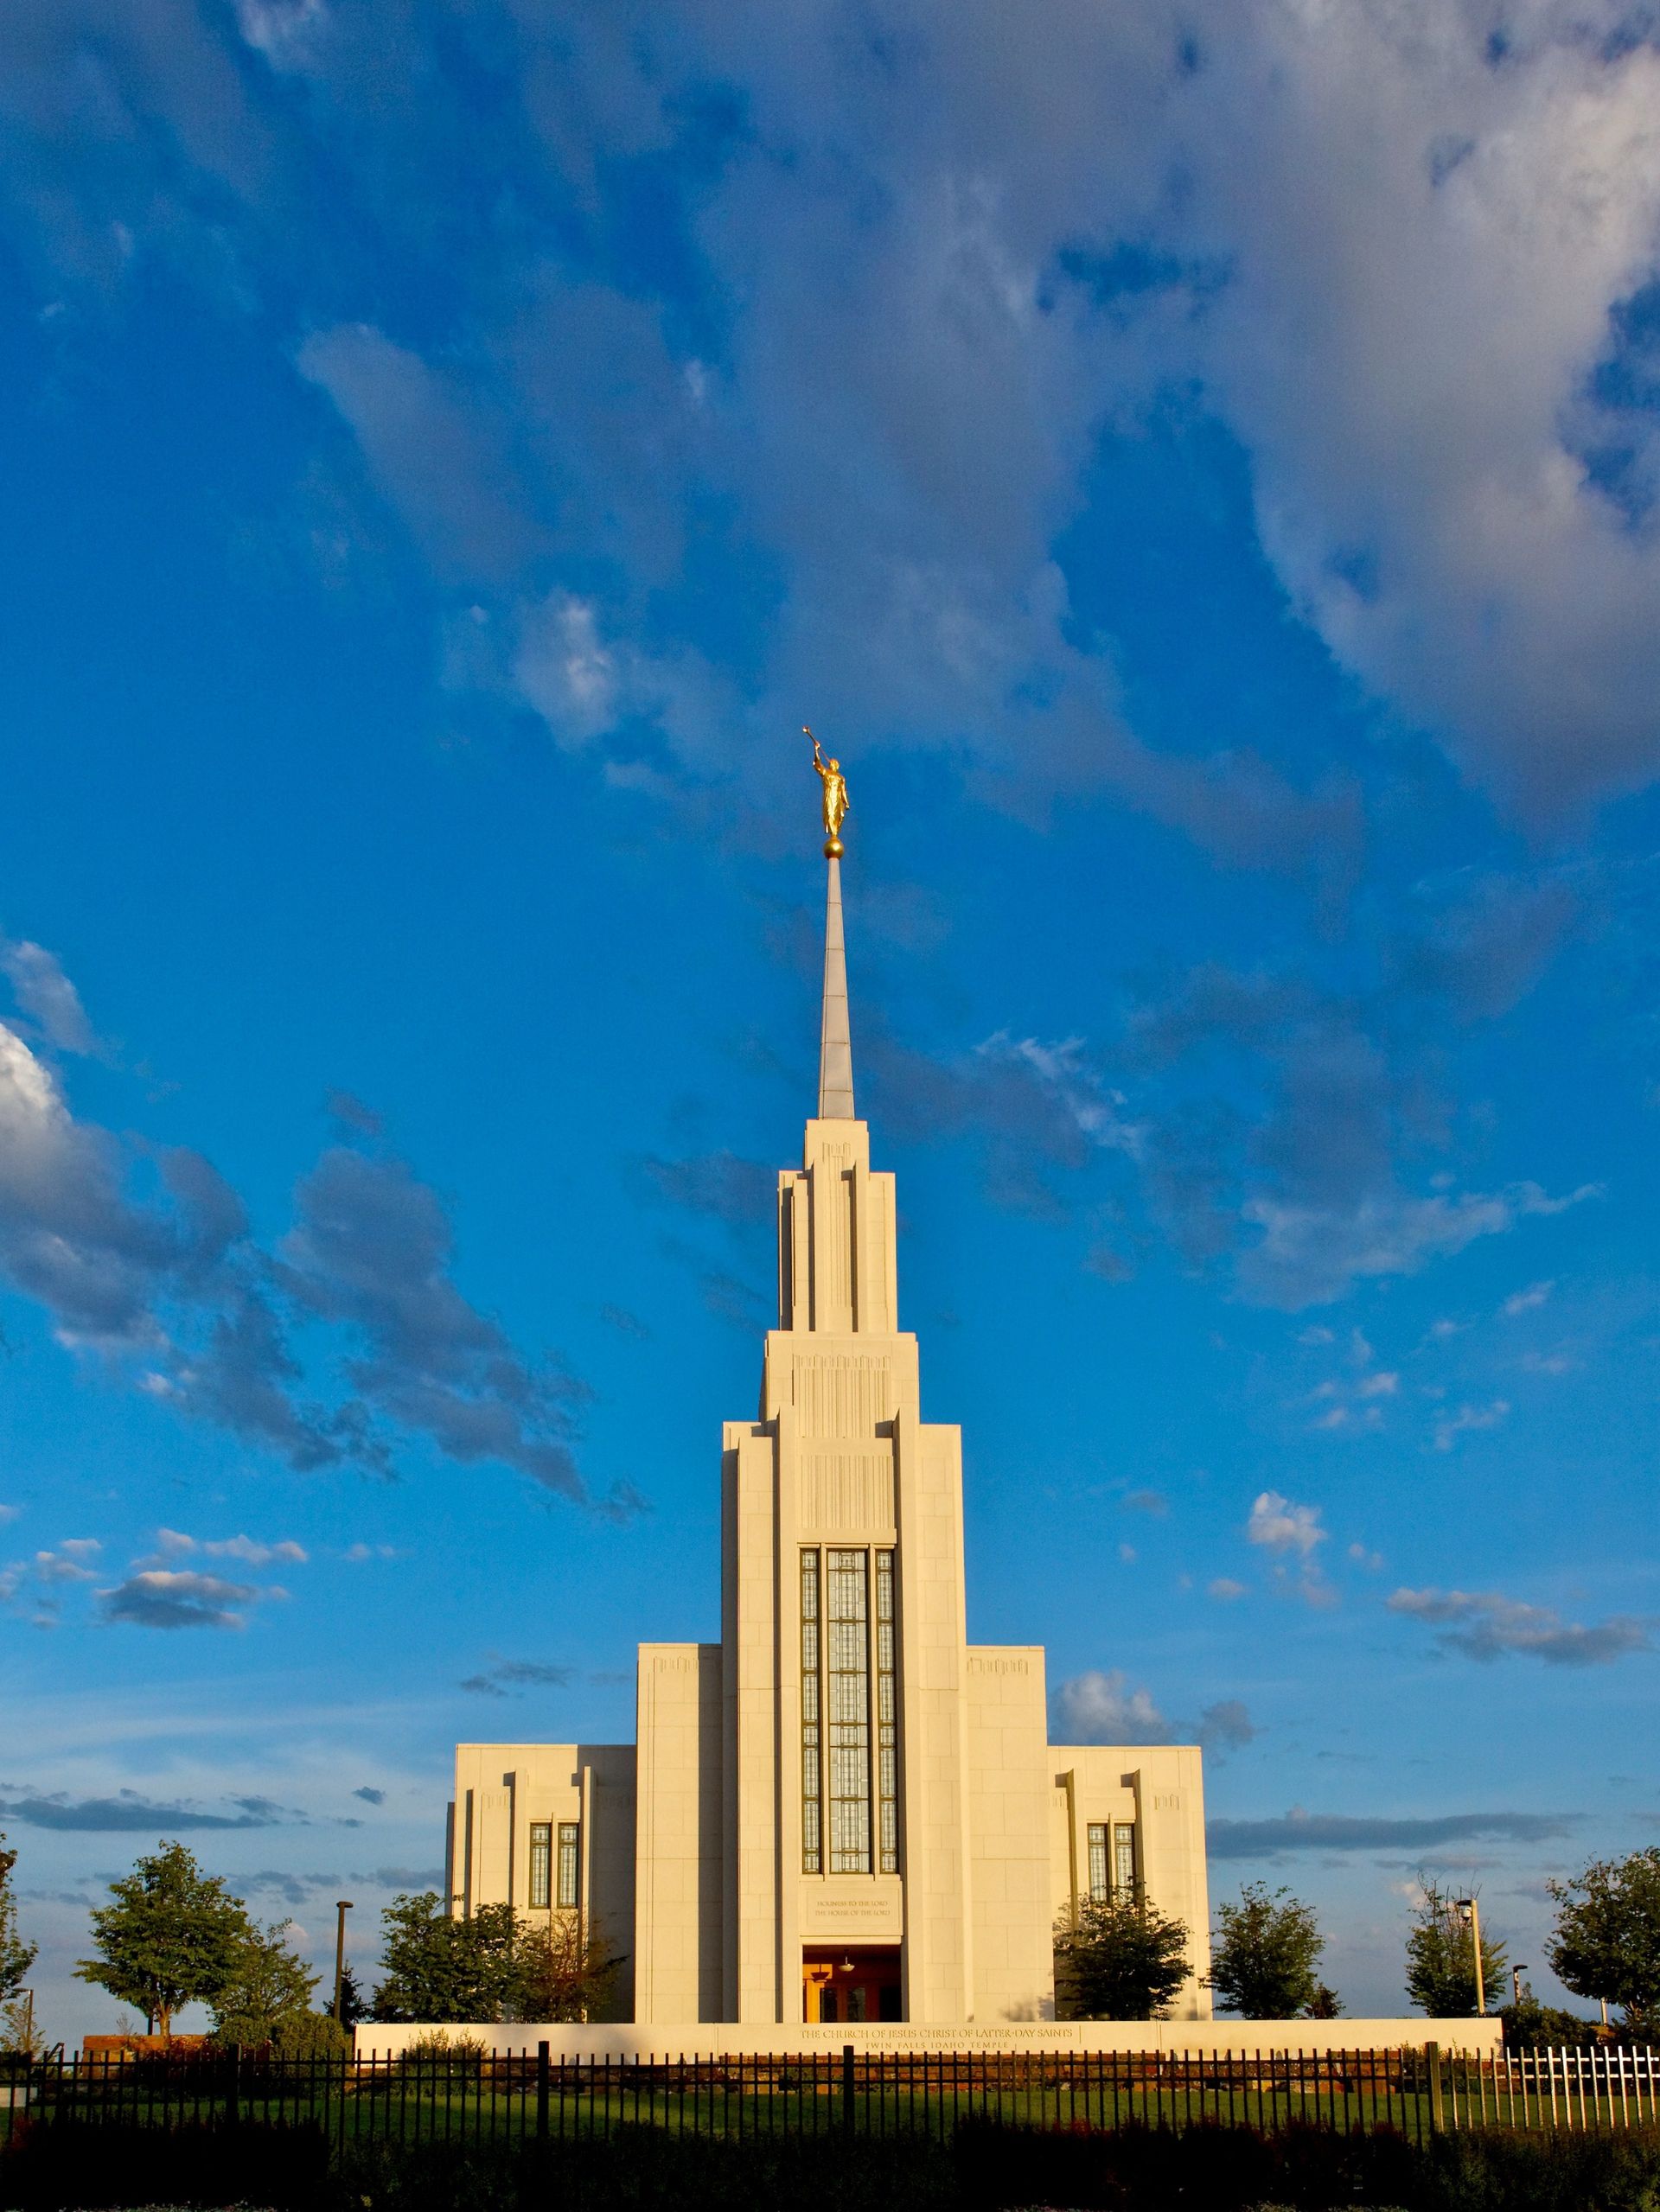 The entire Twin Falls Idaho Temple during daylight, including the entrance and scenery.